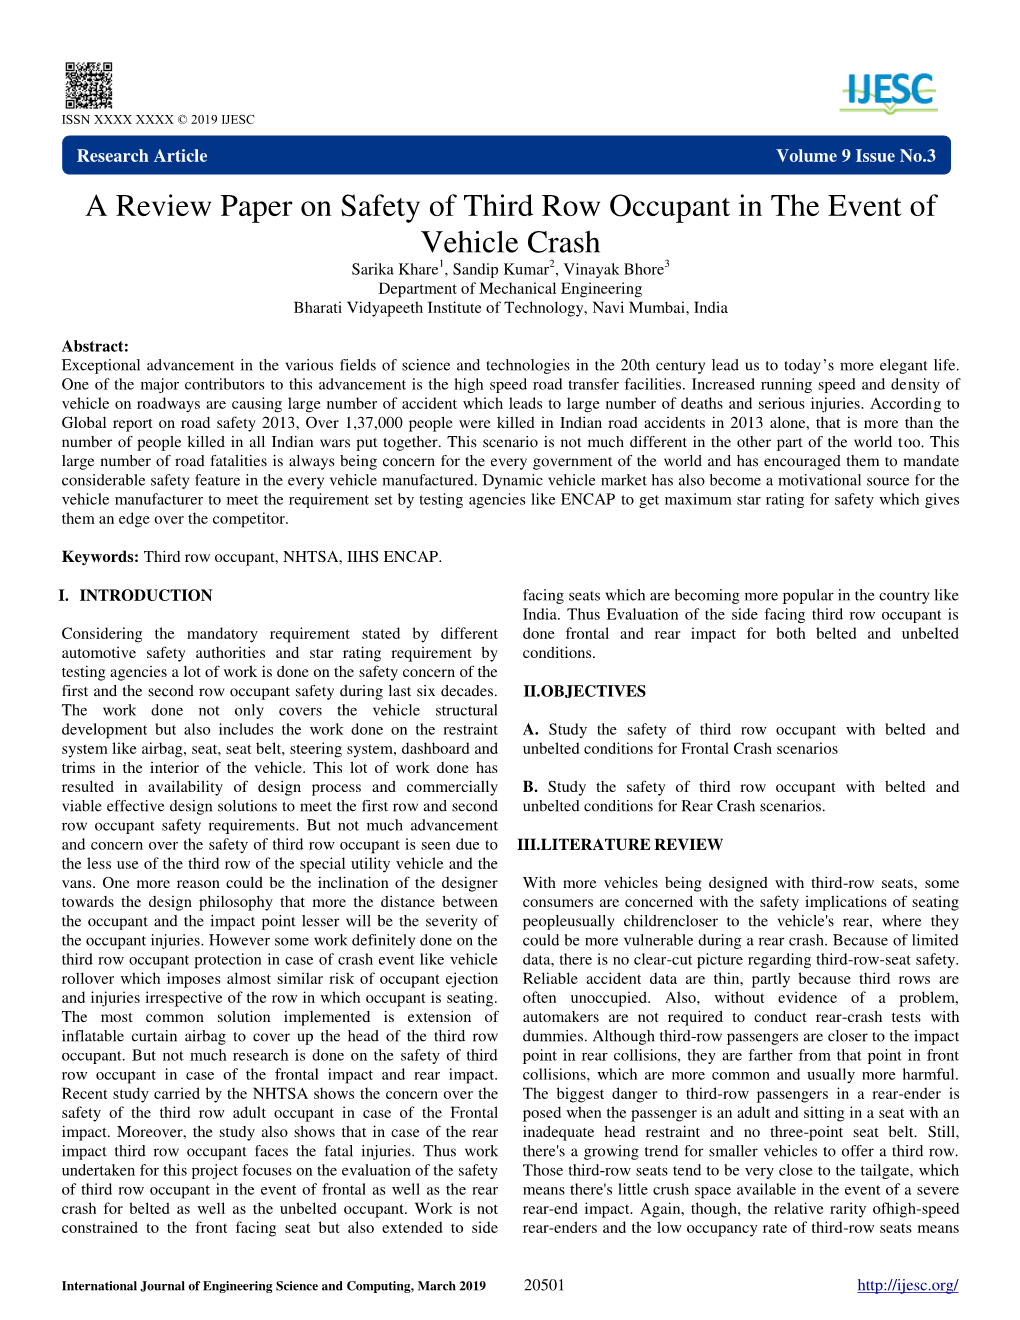 A Review Paper on Safety of Third Row Occupant in the Event Of